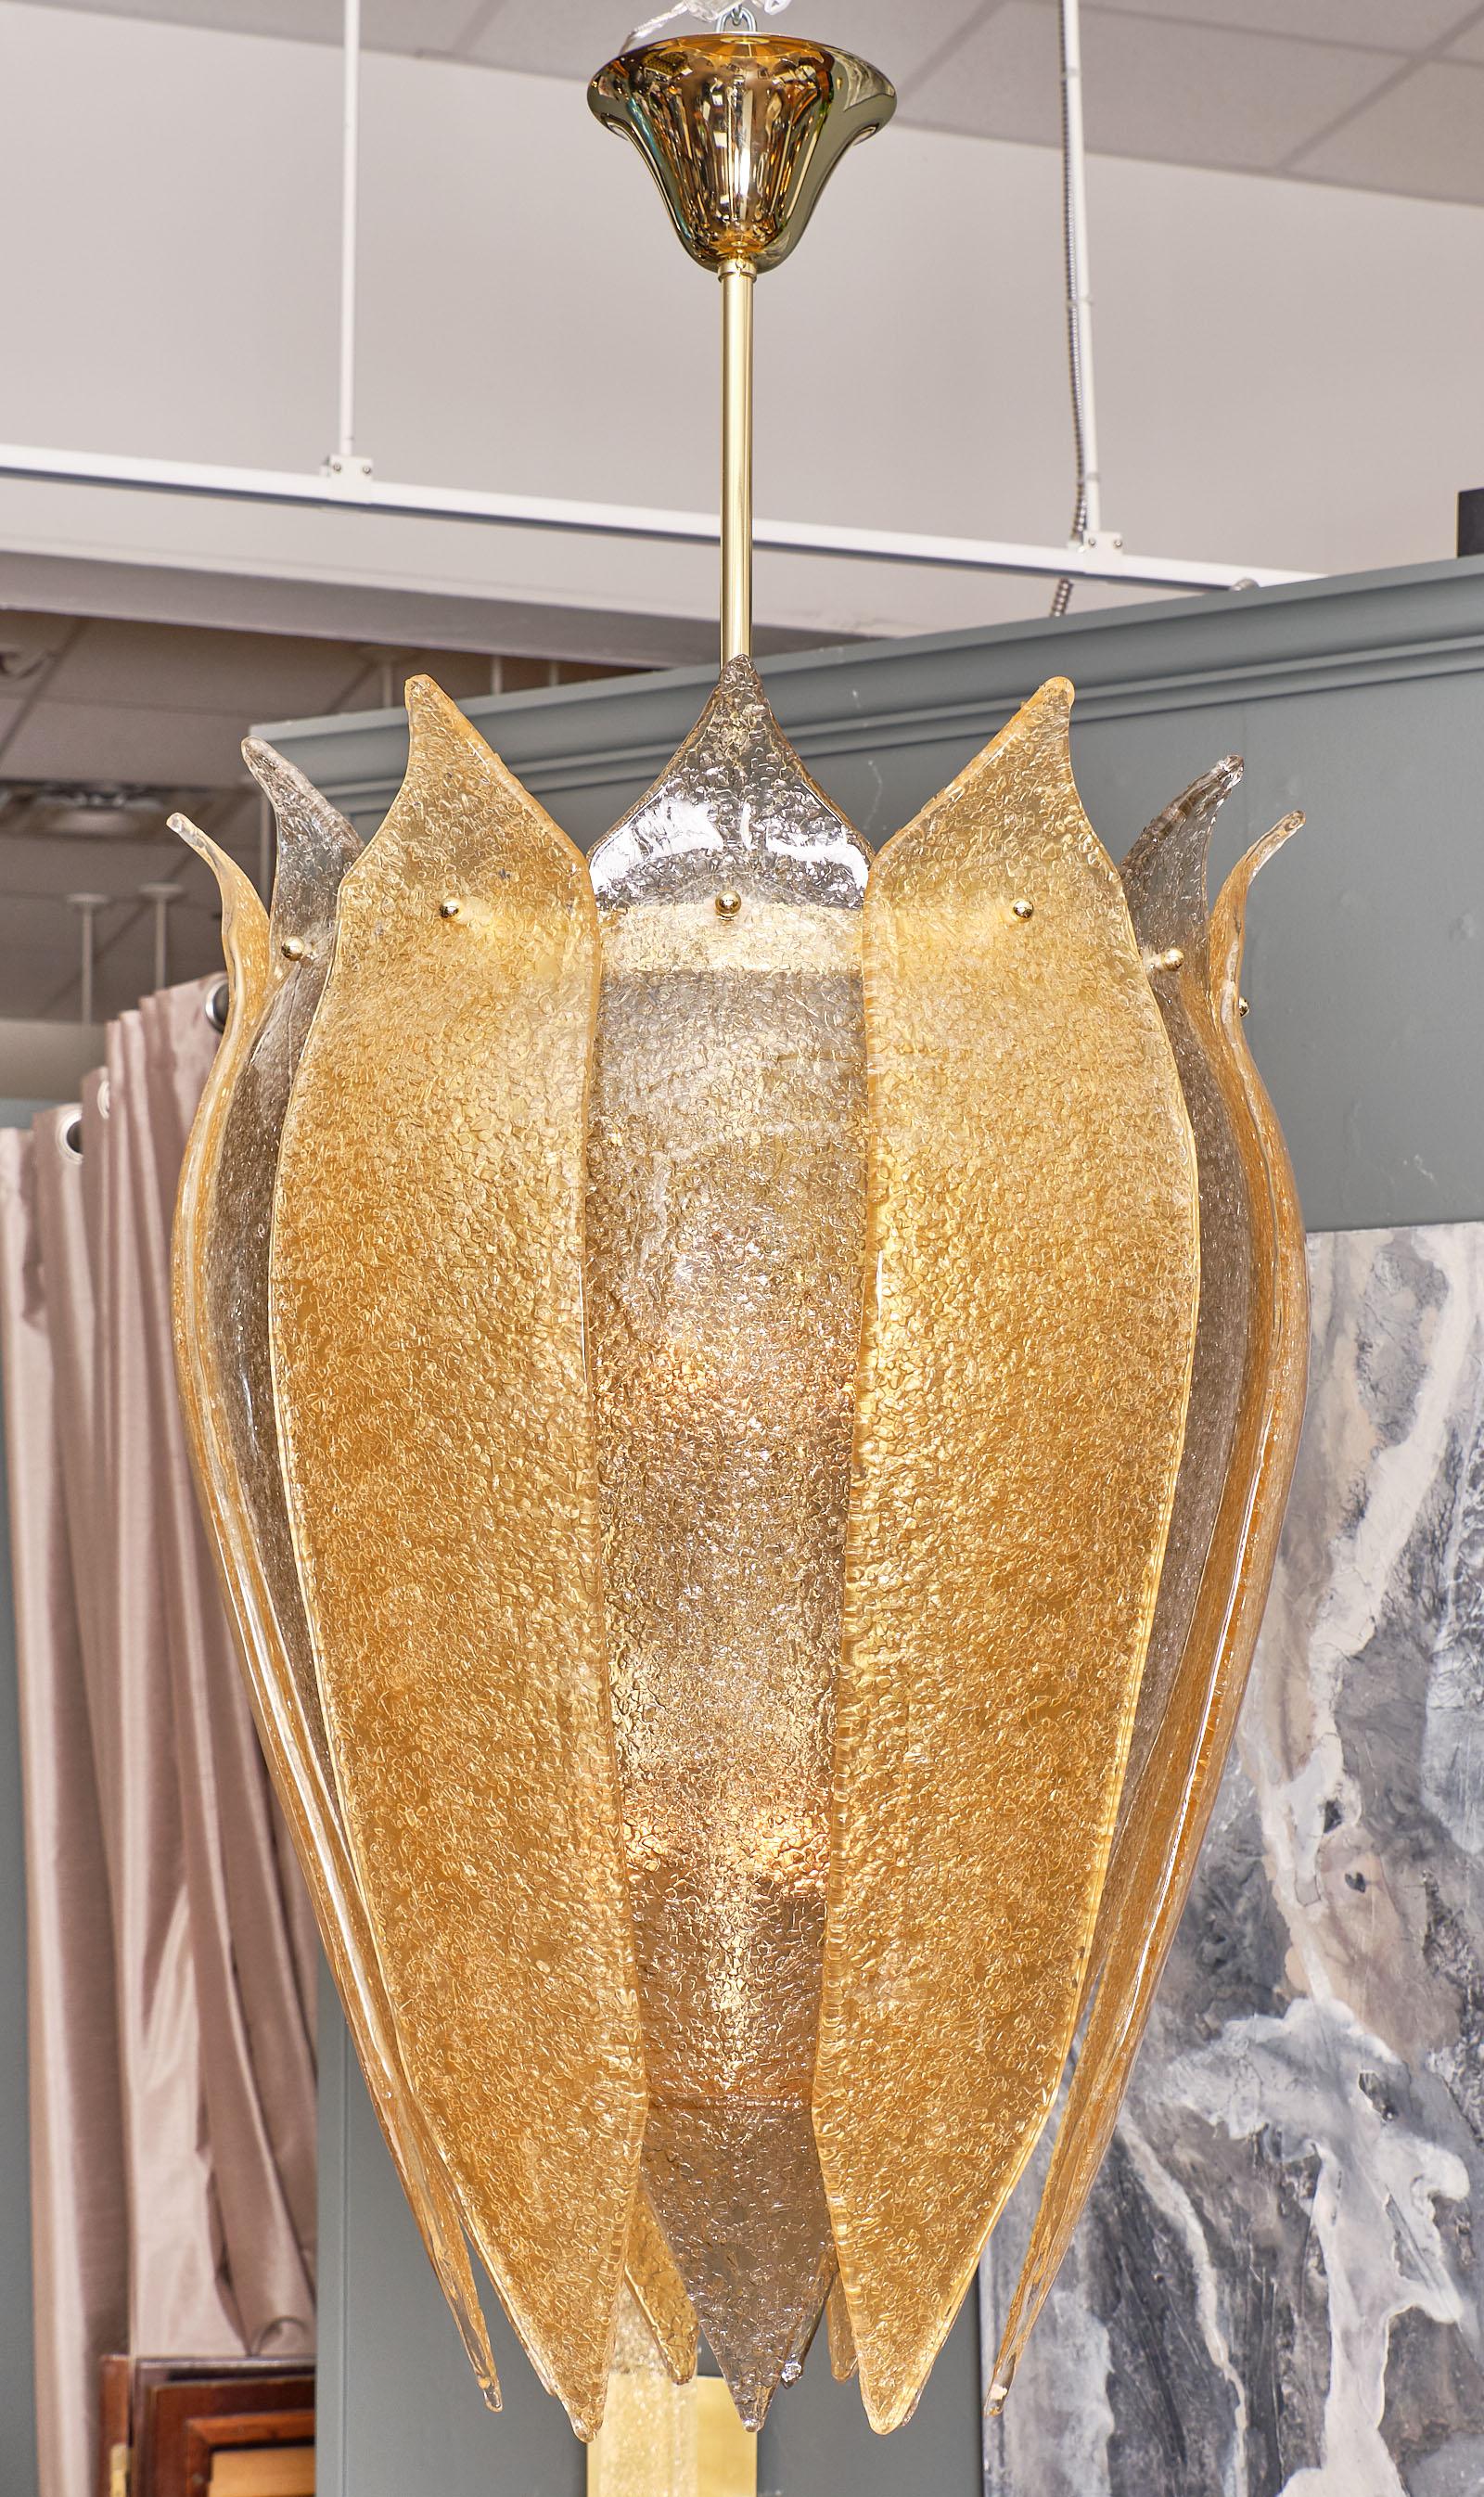 Murano glass “Virna” lantern chandelier with a spectacular curved form and “graniglia” hand blown glass leaves in gold and amber. The structure is brass. This piece has been newly wired to fit US standards.